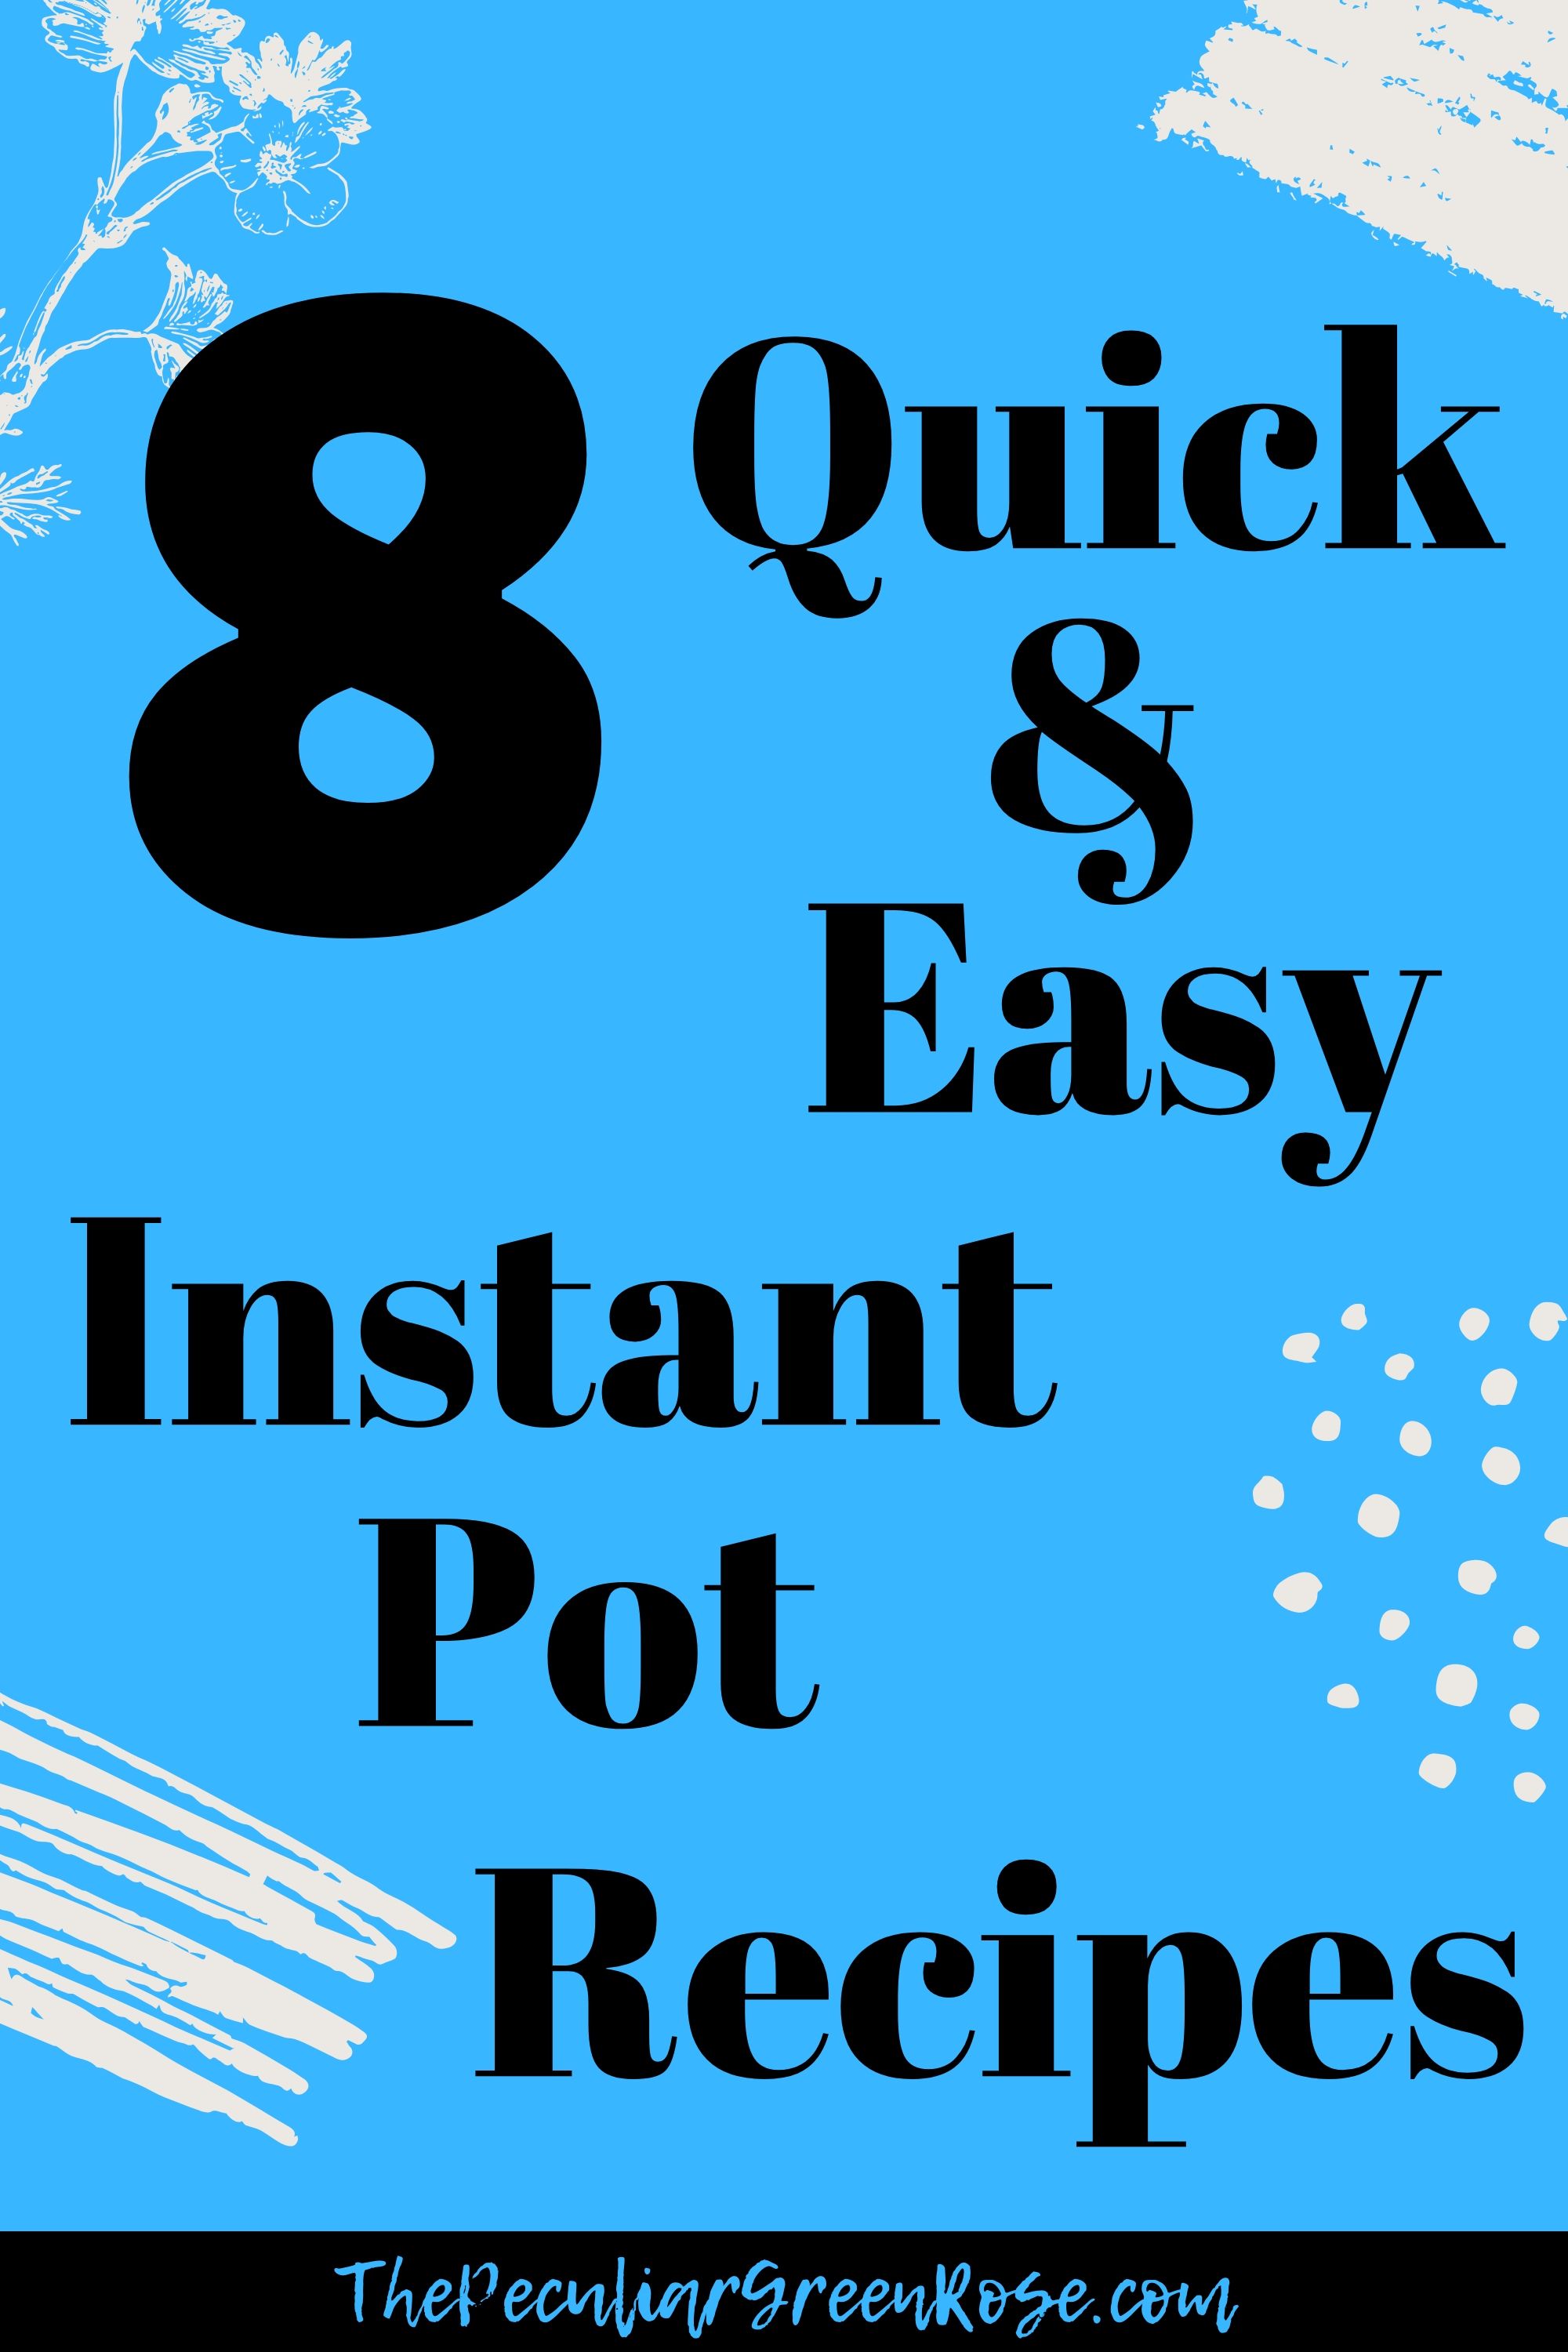 8 Quick and Easy Instant Pot Recipes - The Peculiar Green Rose